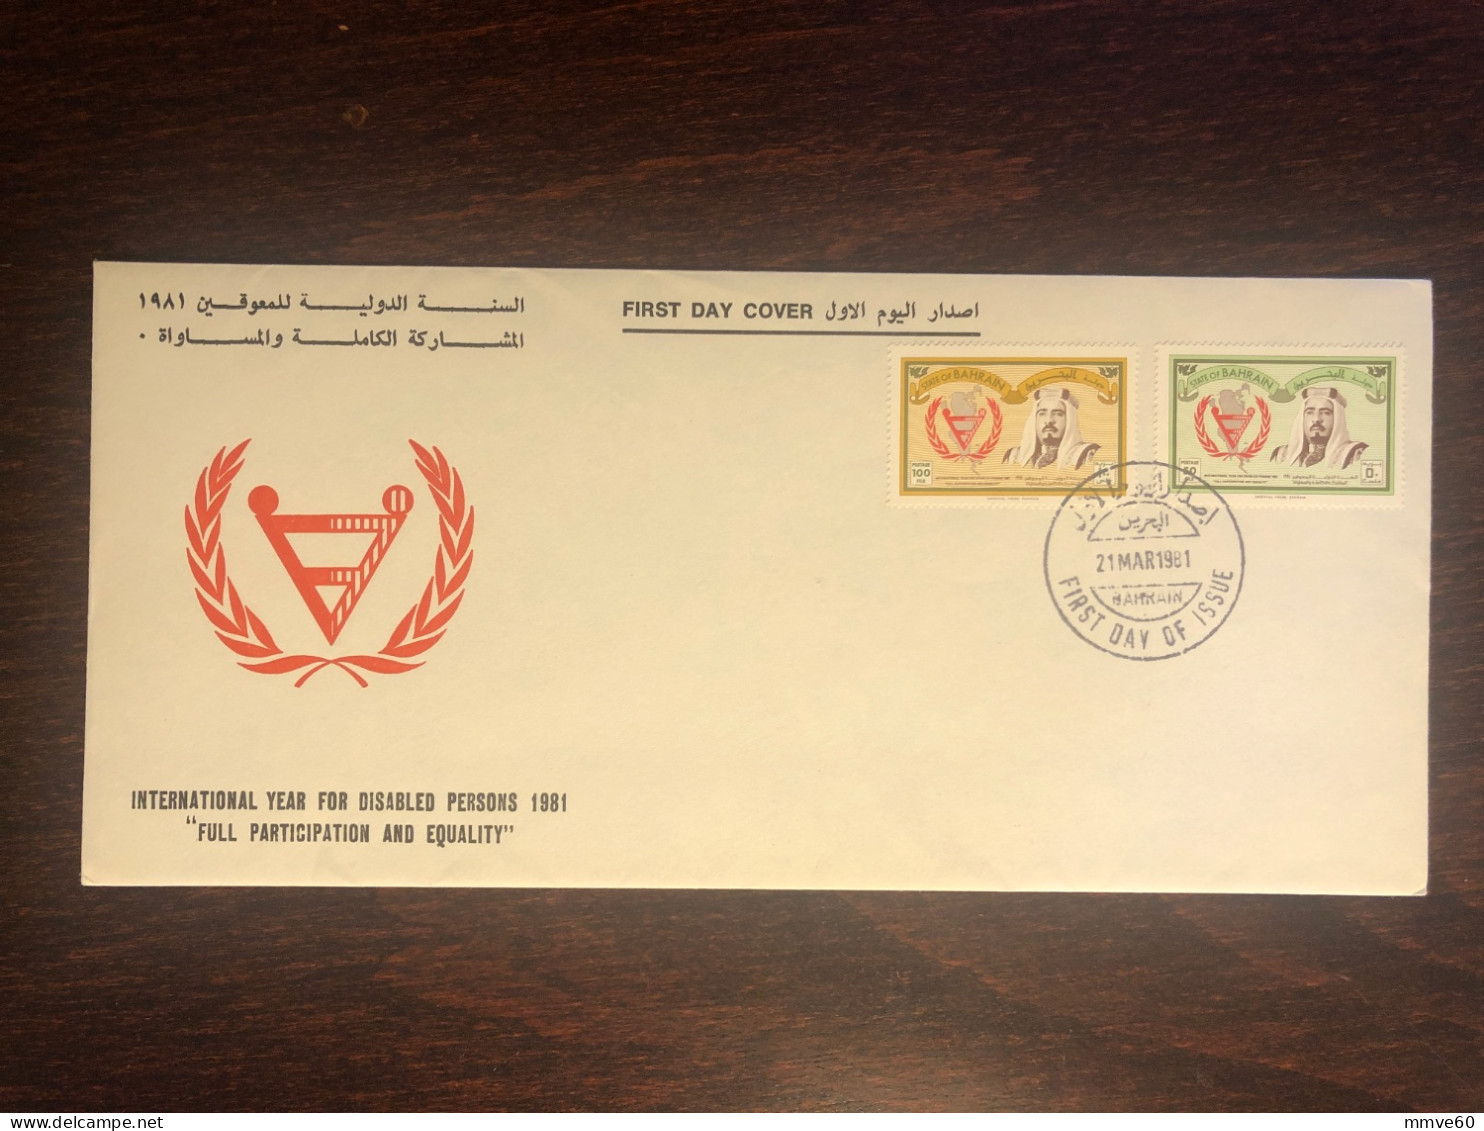 BAHRAIN FDC COVER 1981 YEAR DISABLED PEOPLE HEALTH MEDICINE STAMPS - Bahrein (1965-...)